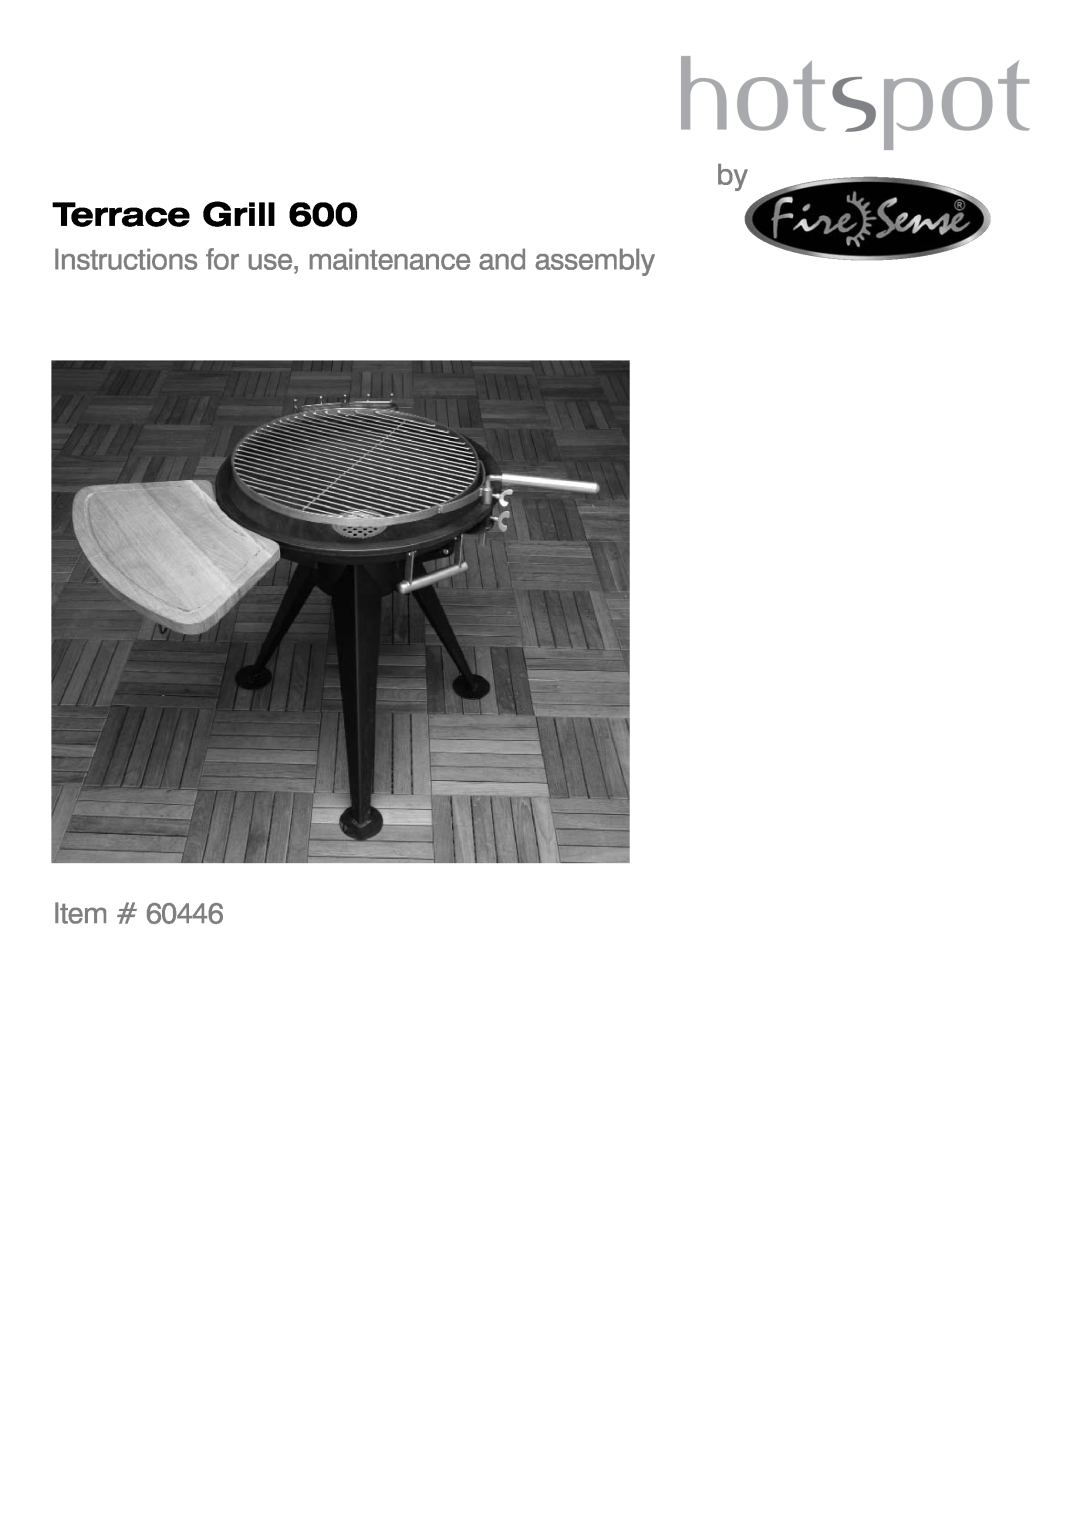 Well Traveled Living 60446, Terrace Grill 600 manual Instructions for use, maintenance and assembly Item # 